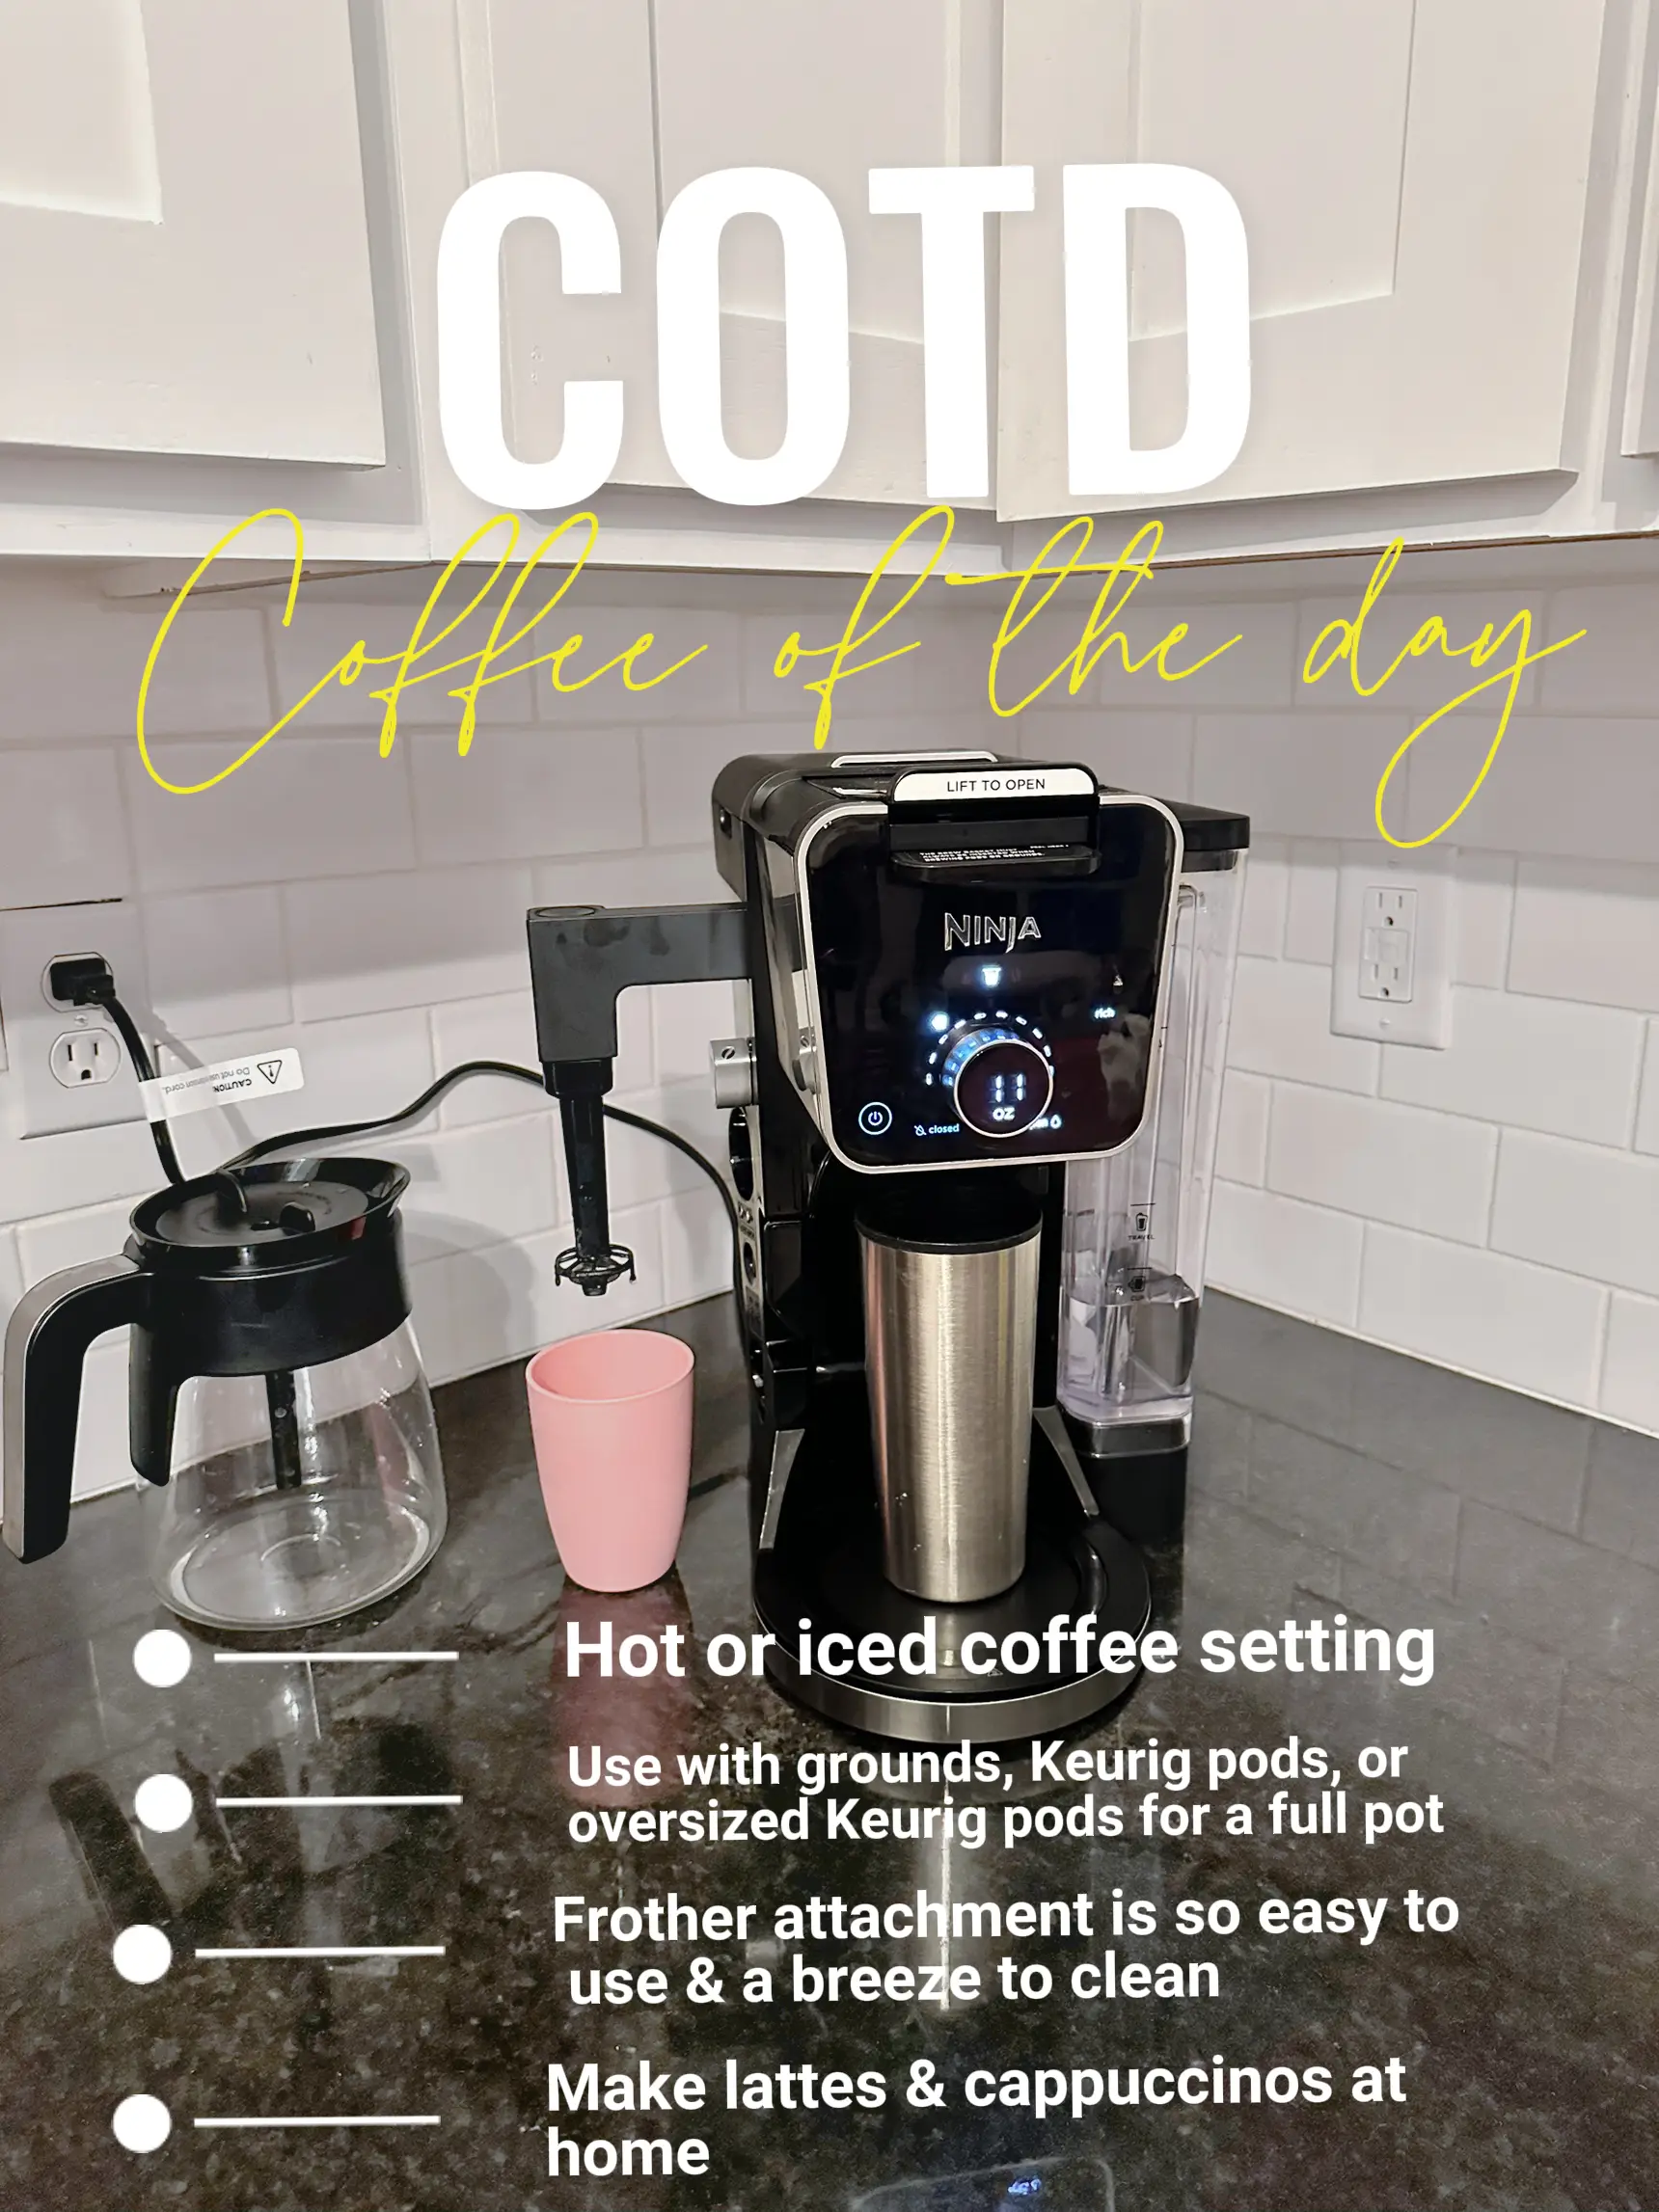 ✨COTD - Coffee Of The Day☕️ Hot or Iced 😍